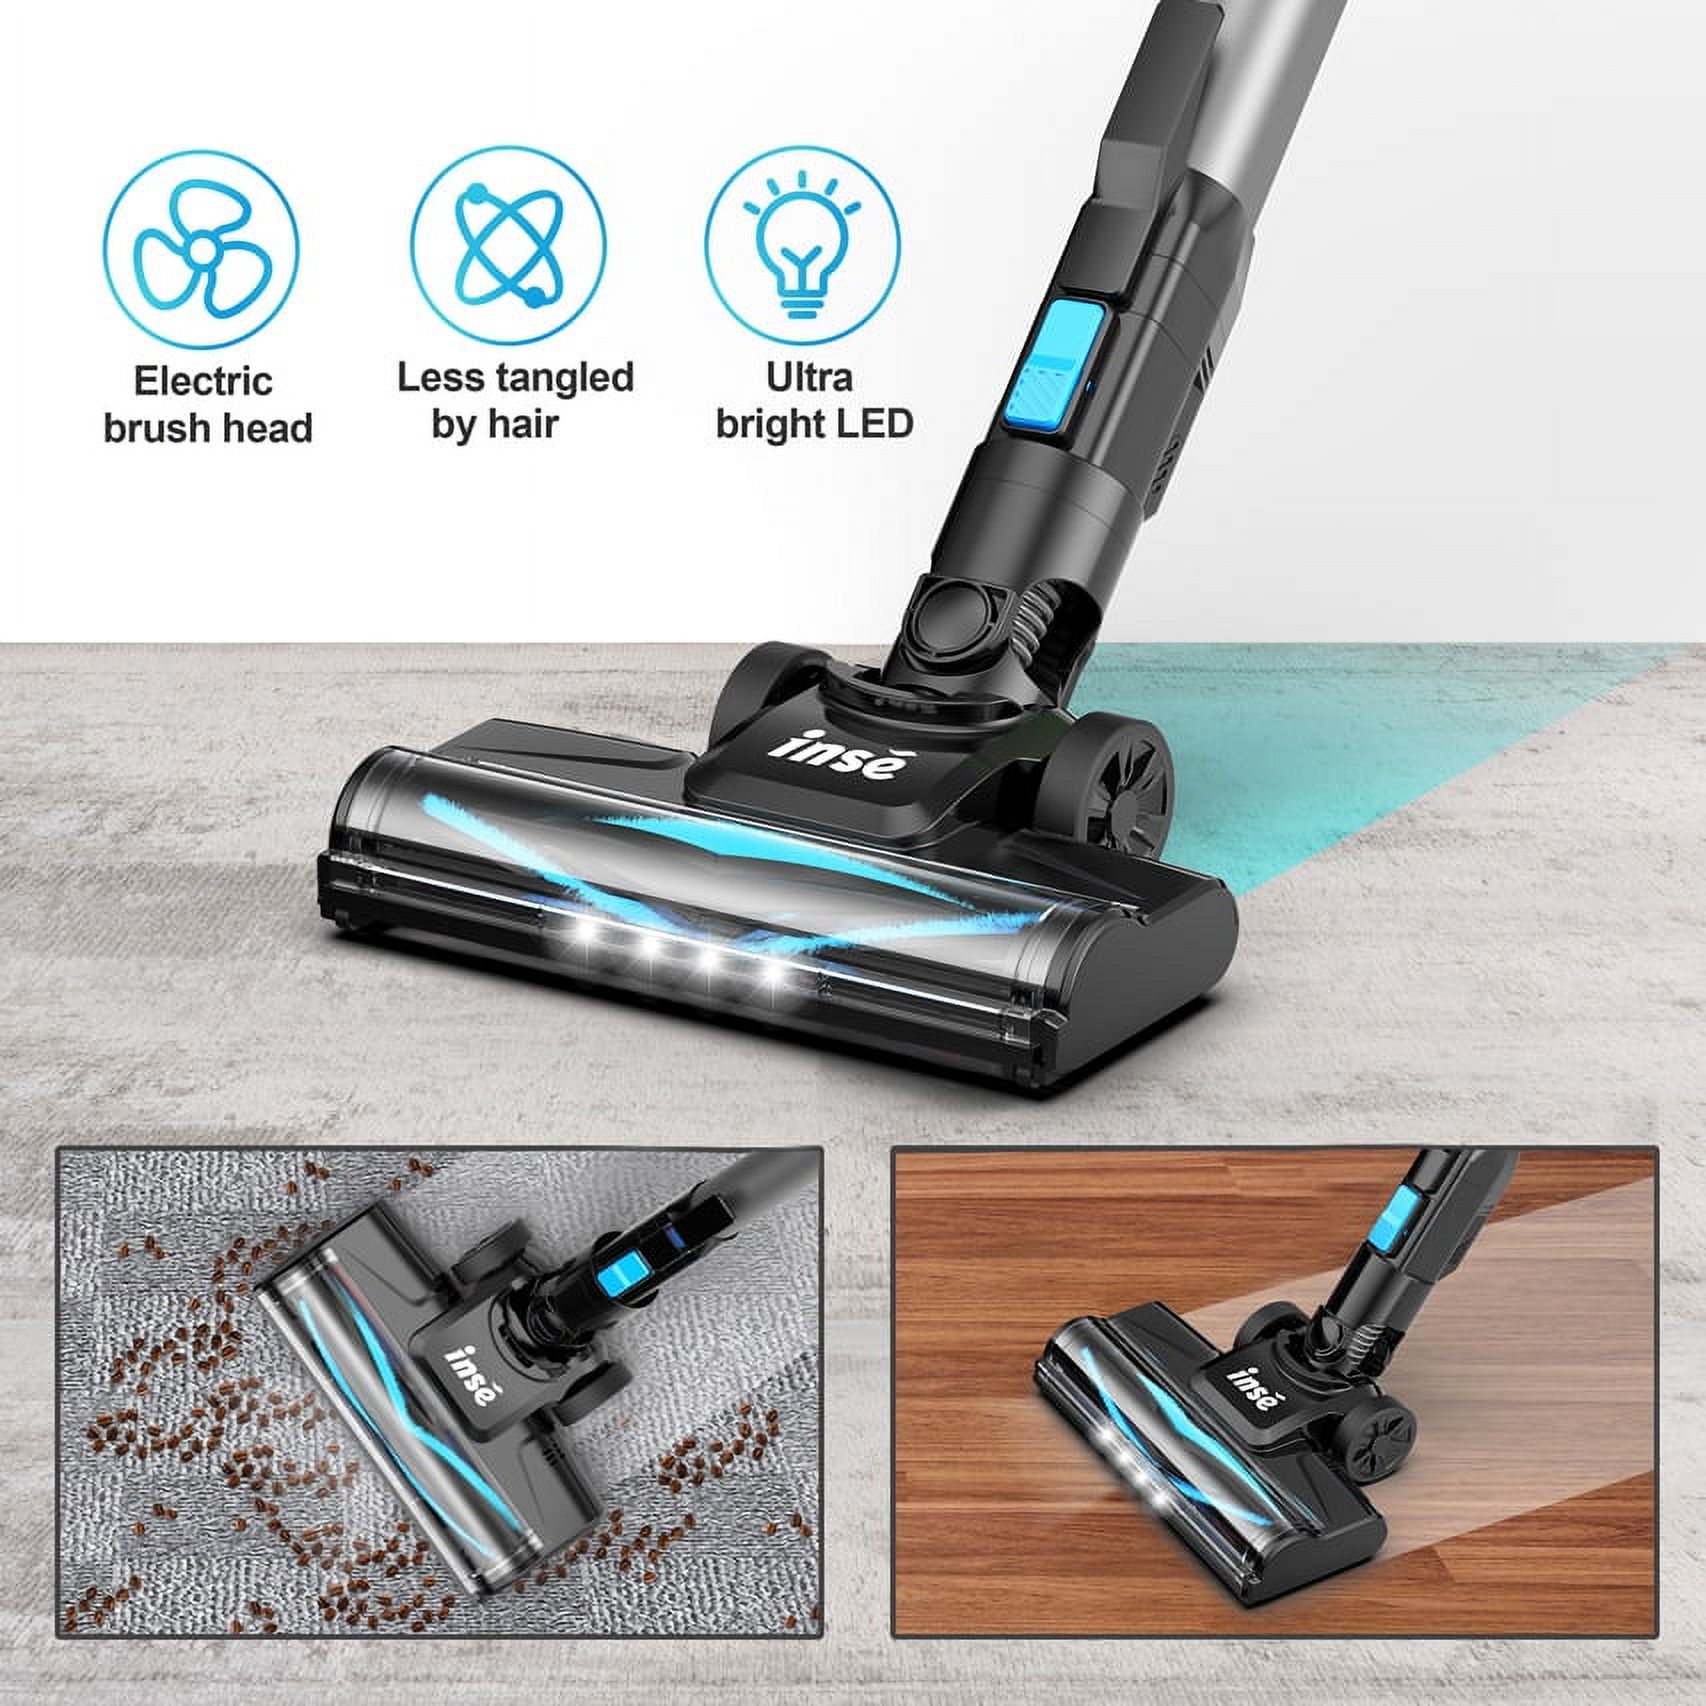 INSE Cordless Vacuum Cleaner, 6 in 1 Powerful Suction Lightweight Stick Vacuum with 2200mAh Rechargeable Battery, up to 45min Runtime, for Home Furniture Hard Floor Carpet Car Hair - image 3 of 12